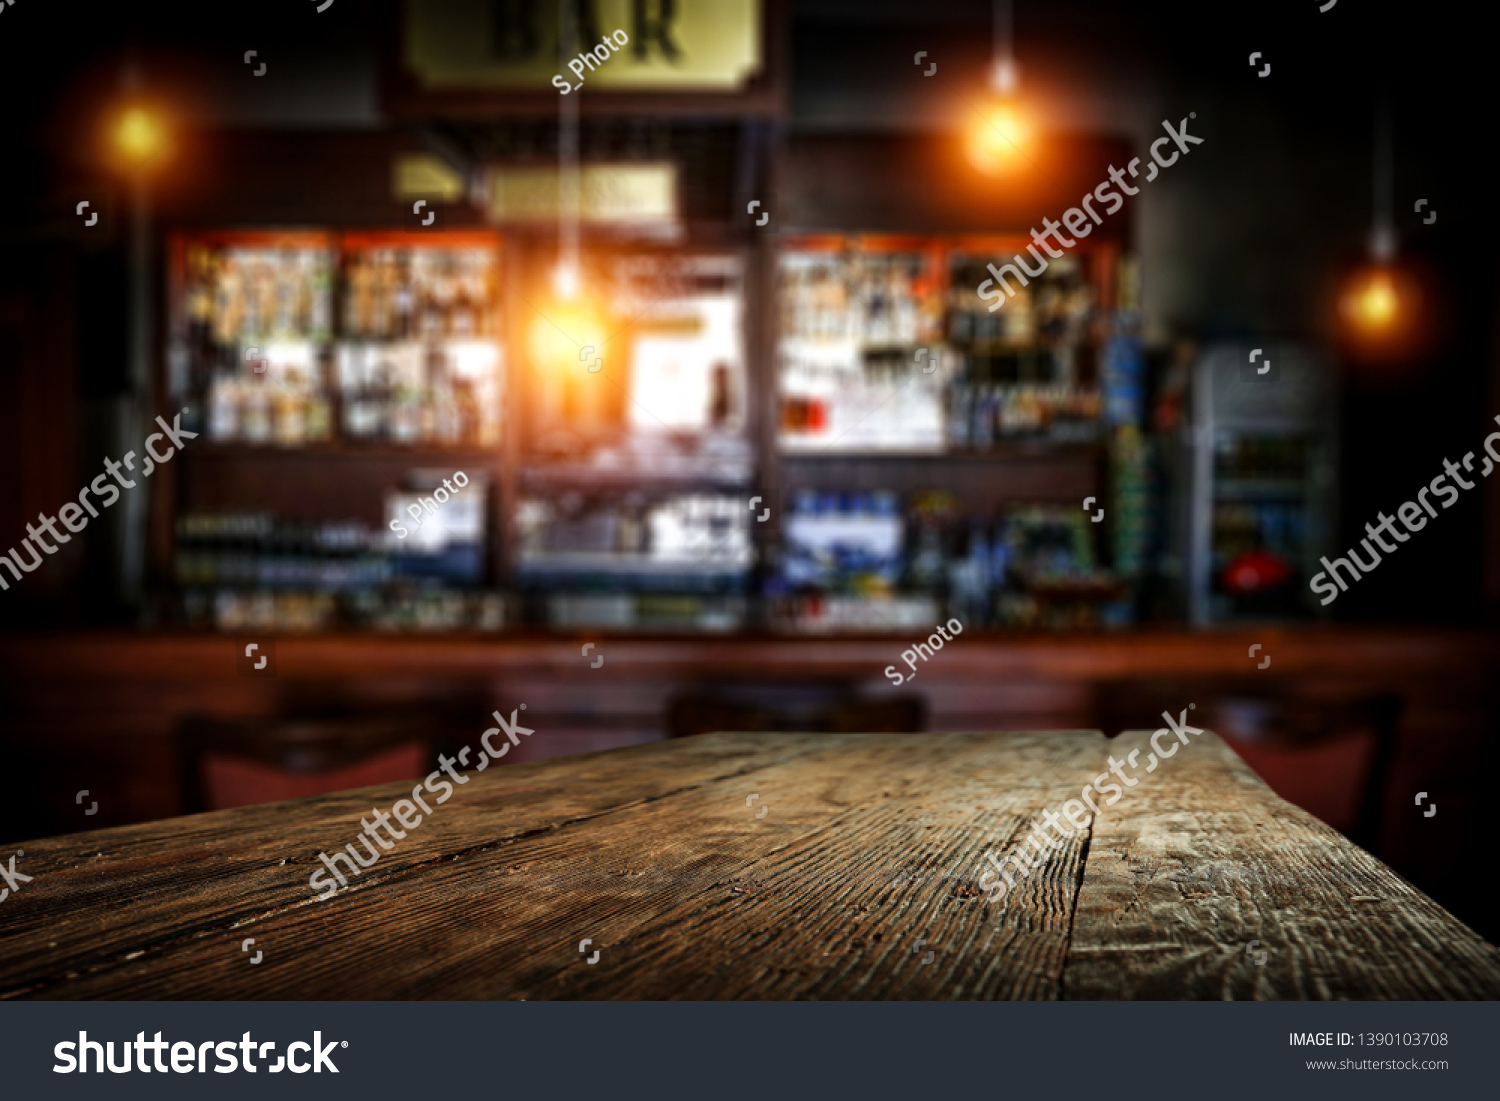 Desk of free space for your decoration and blurred background of bar.  #1390103708